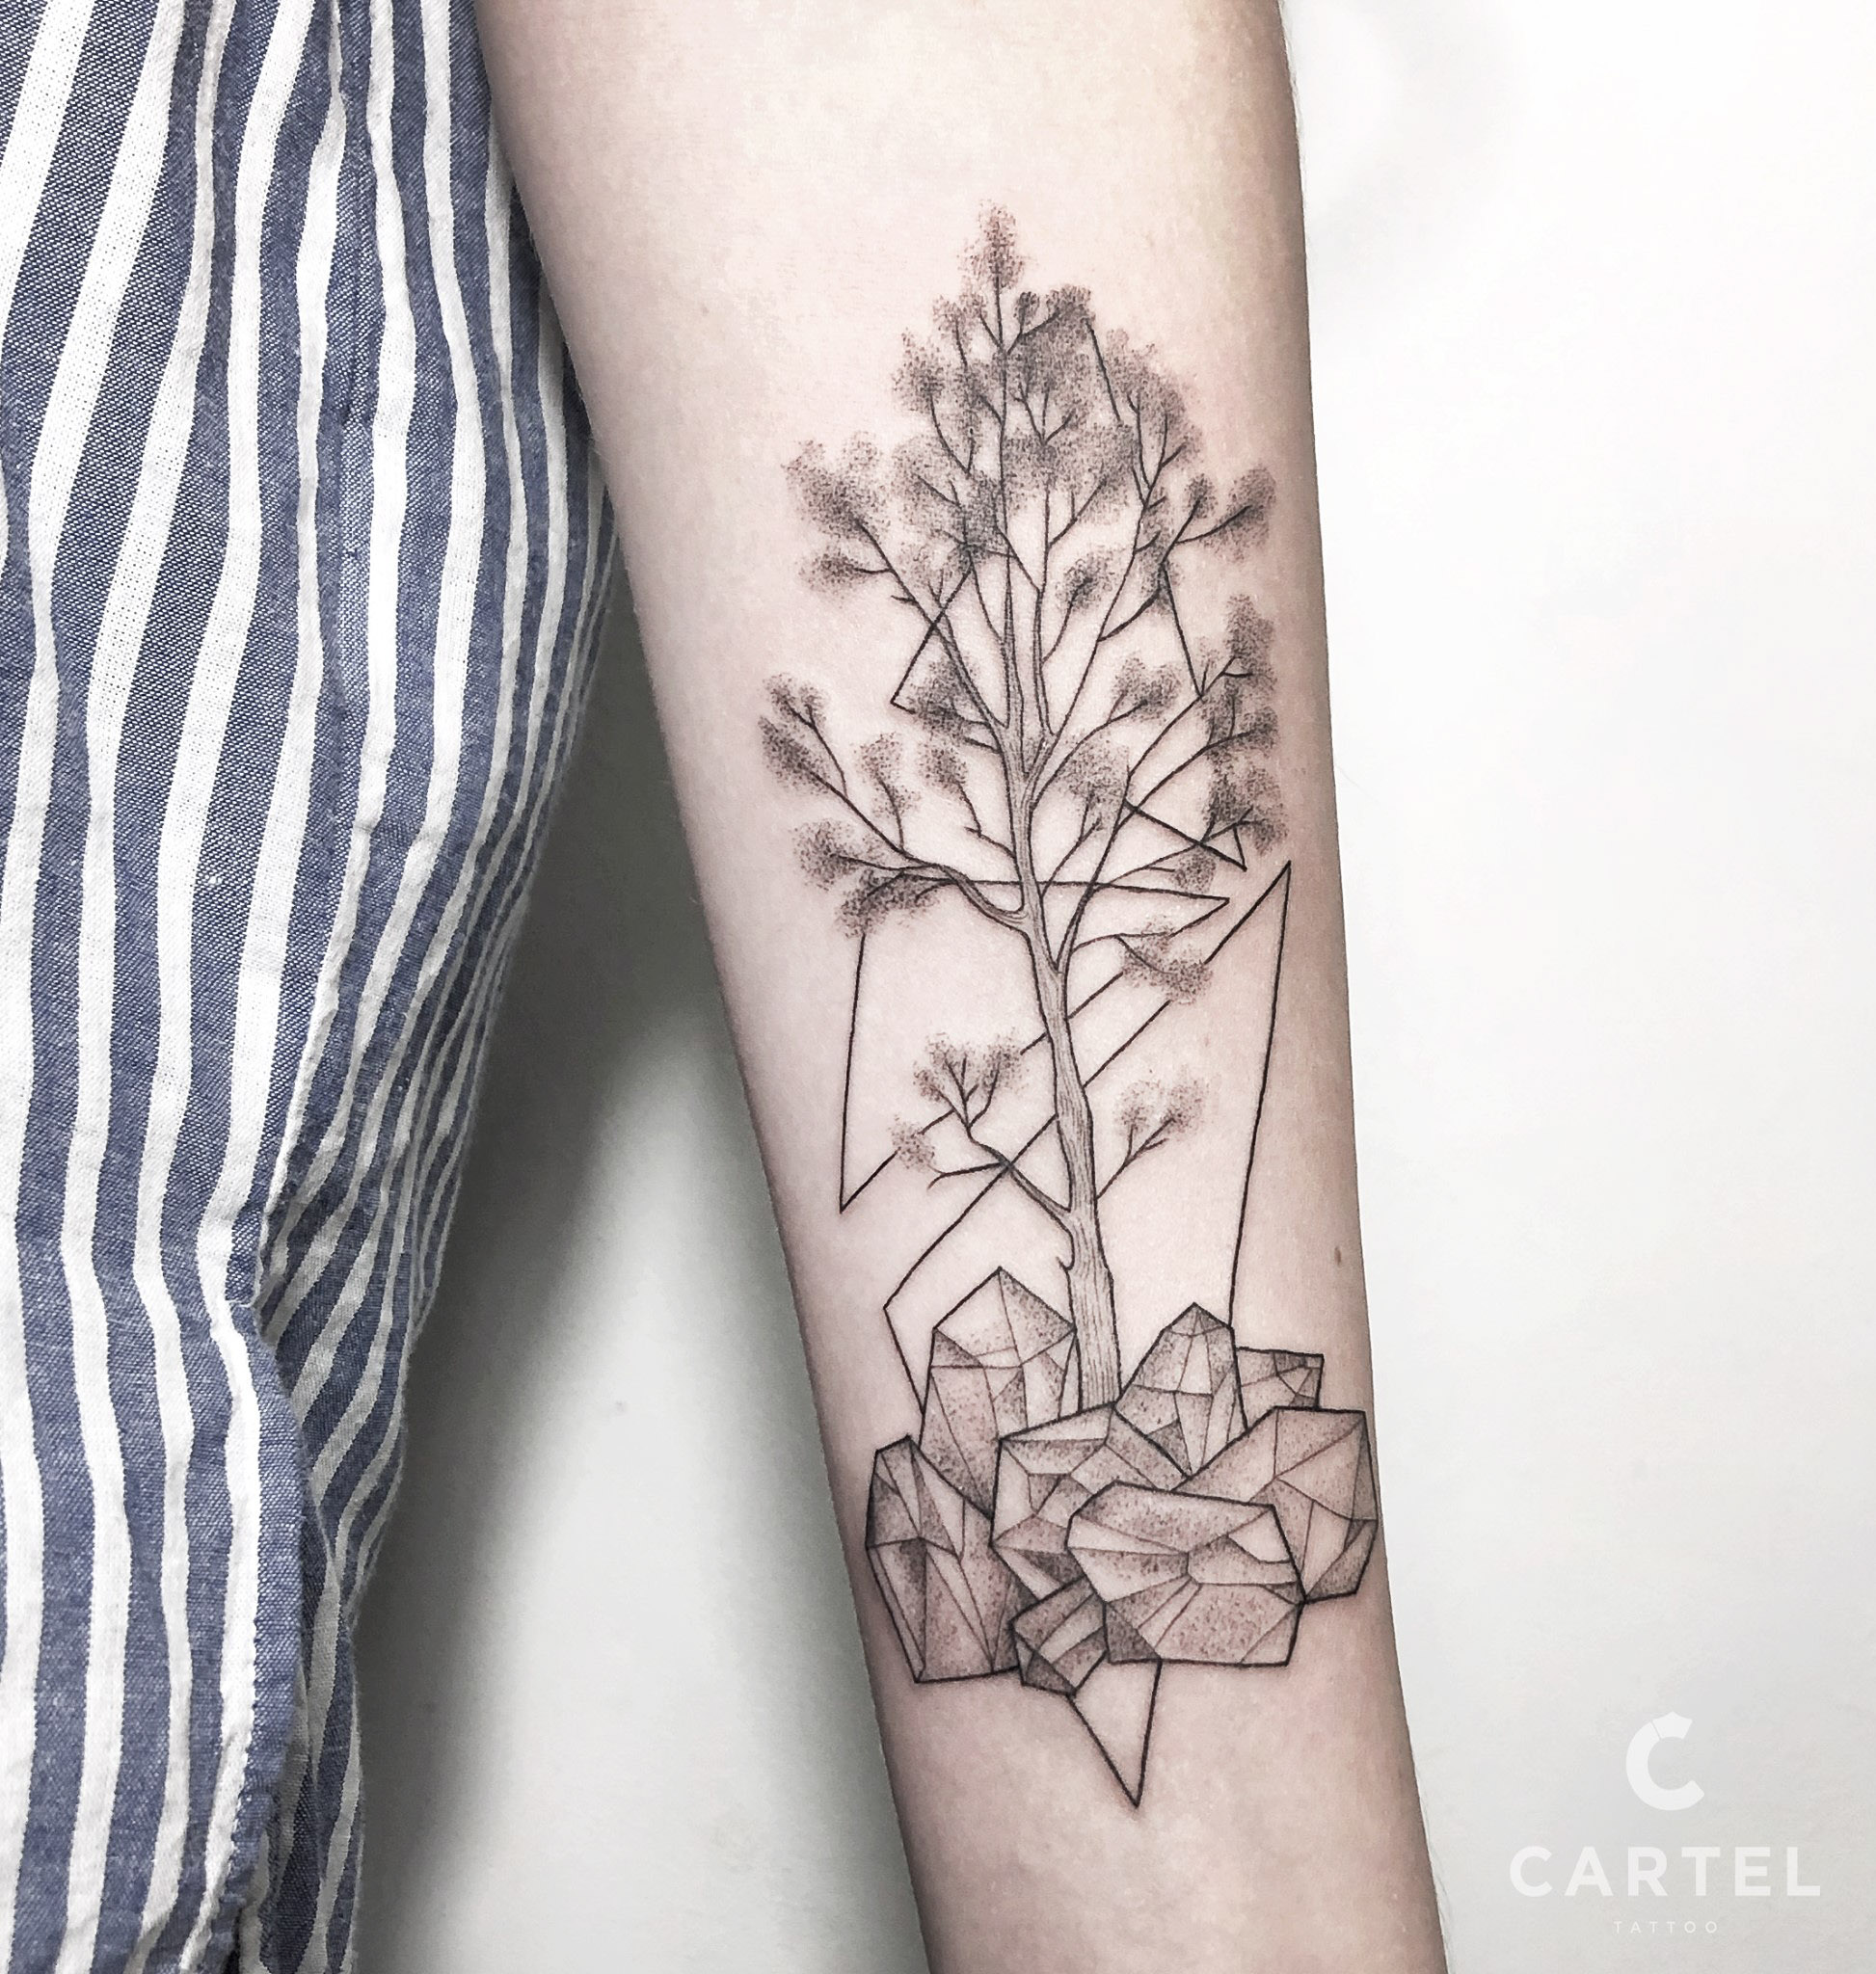 Dotwork Tattoos: All You Need To Know About This Quirky Tattoo Style